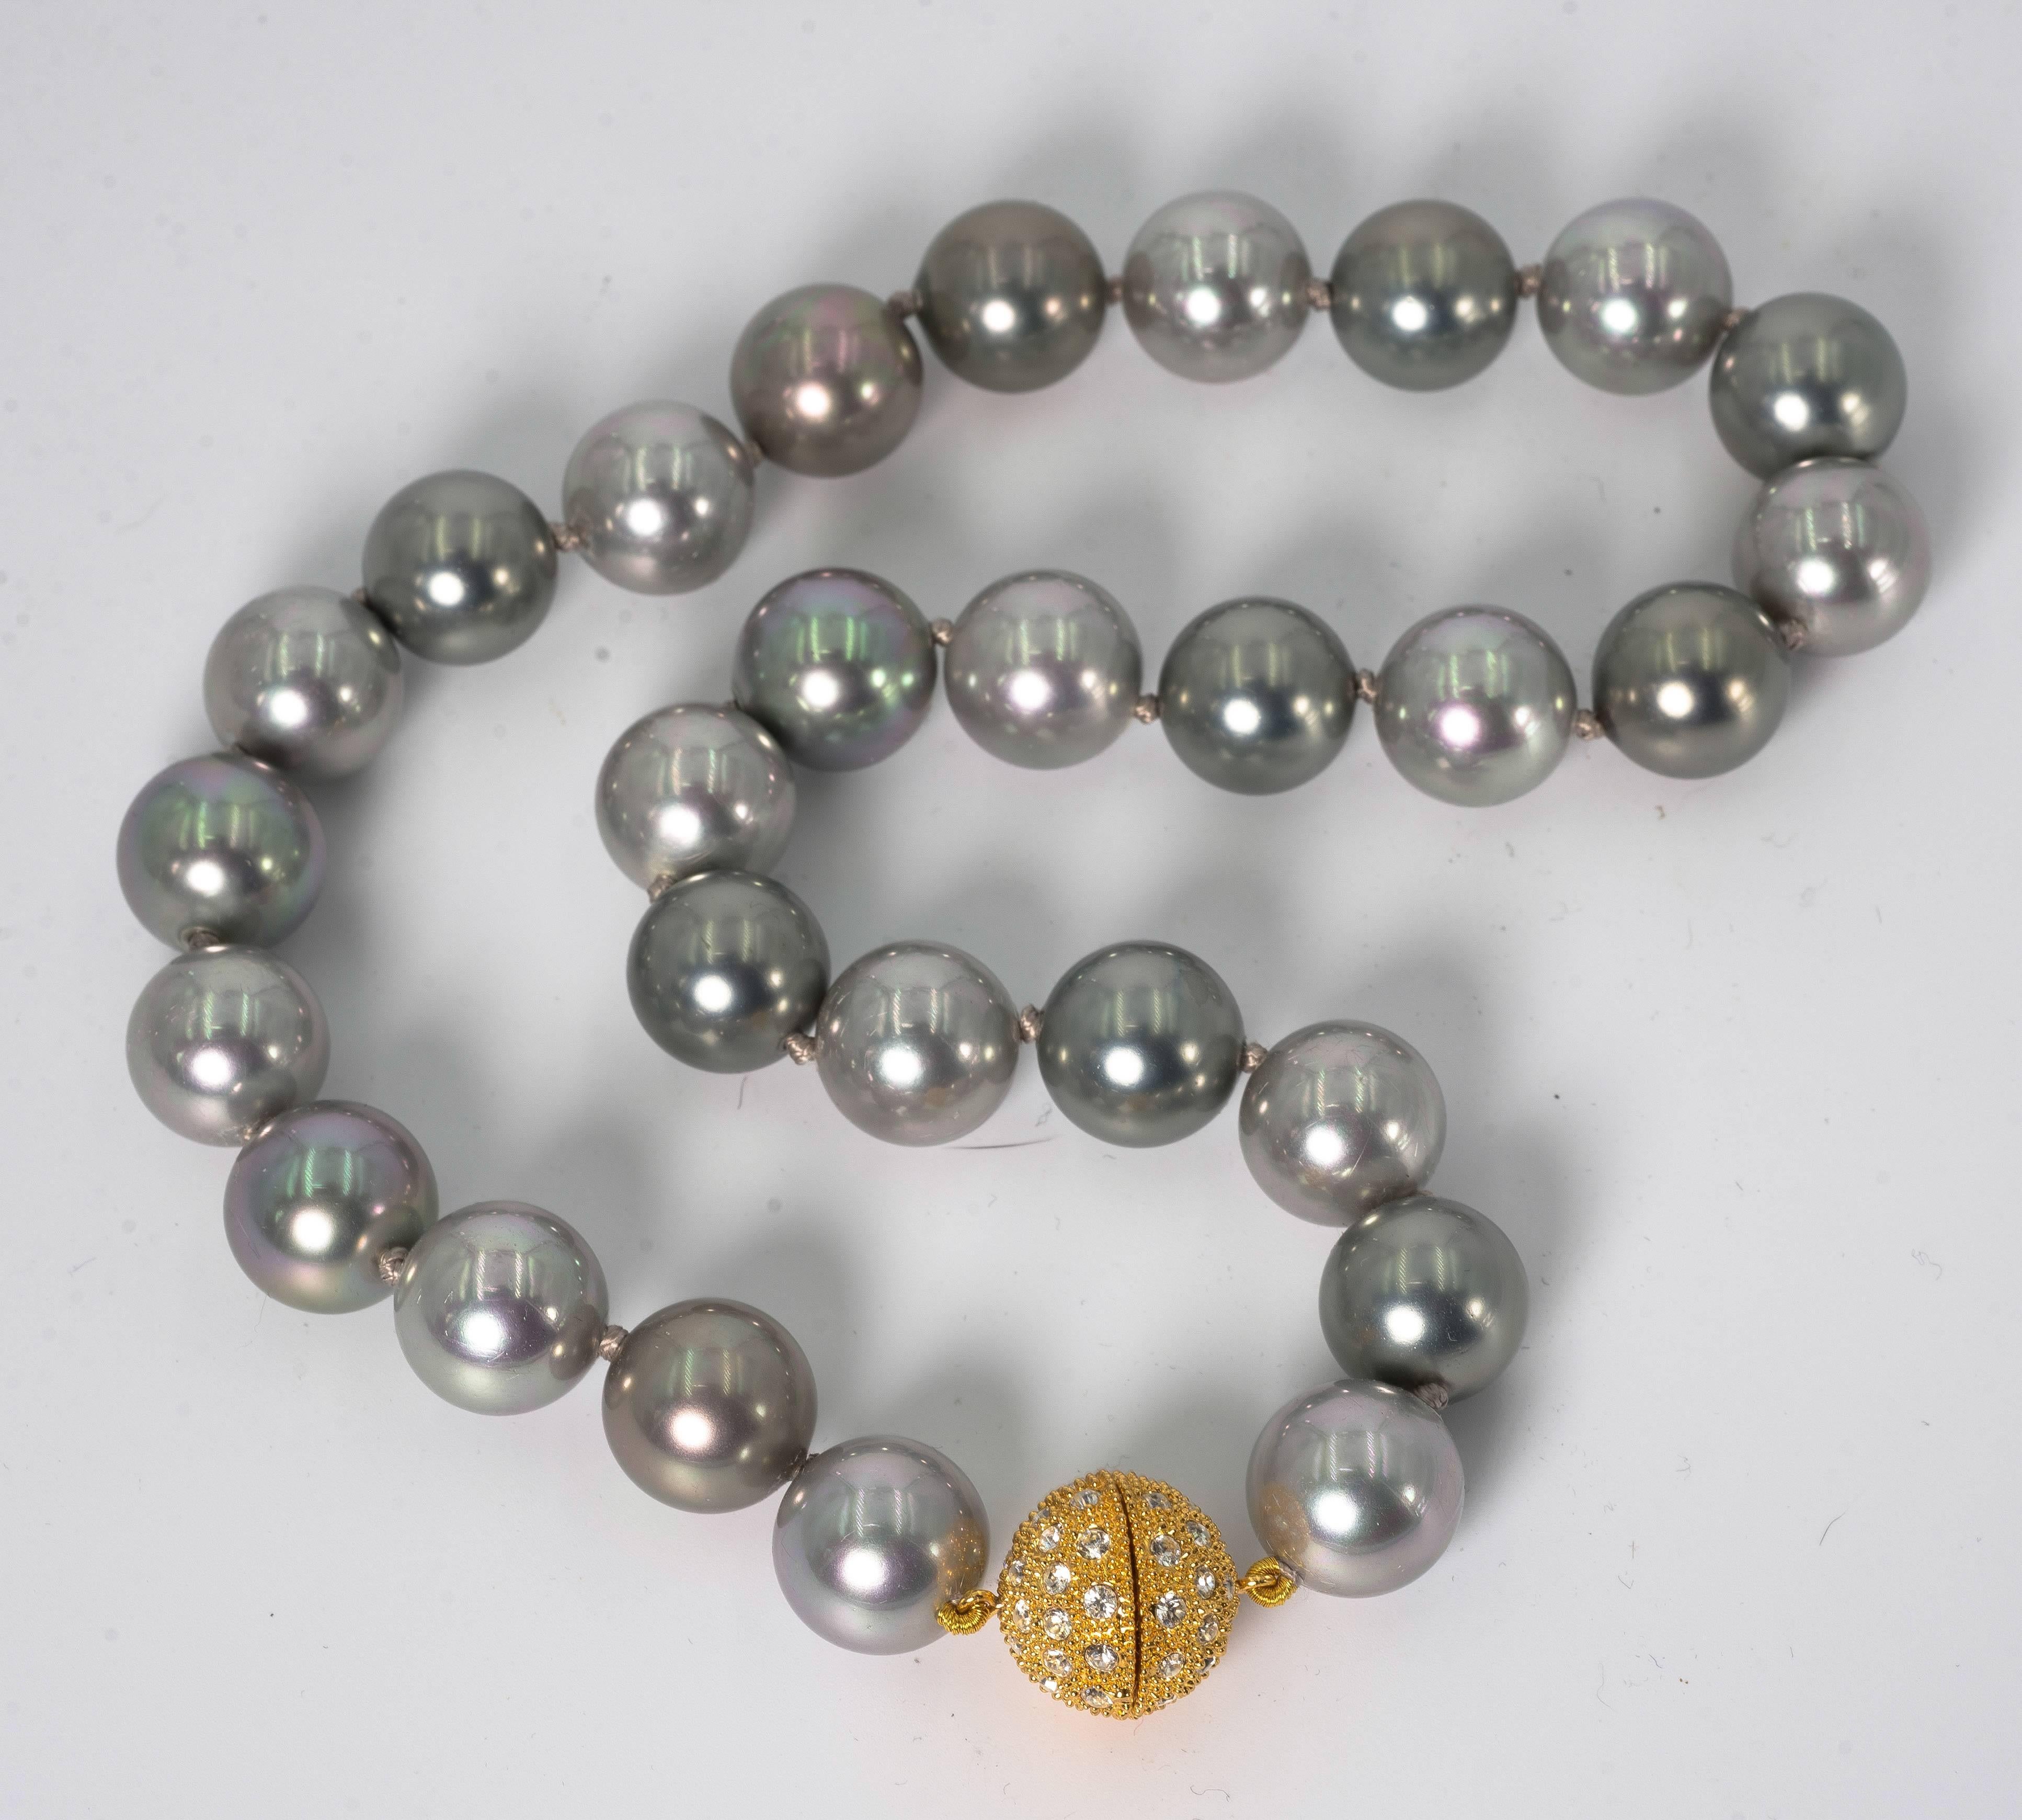 Faux 14mm South Sea Pearl Tahitian Multi Shaded necklace measuring 18’’ to a pave cubic zirconia clasp. Hand silk strung and knotted. These exclusive pearls are made of mother of pearl and have a wonderful lead-free polished luminescent pearl